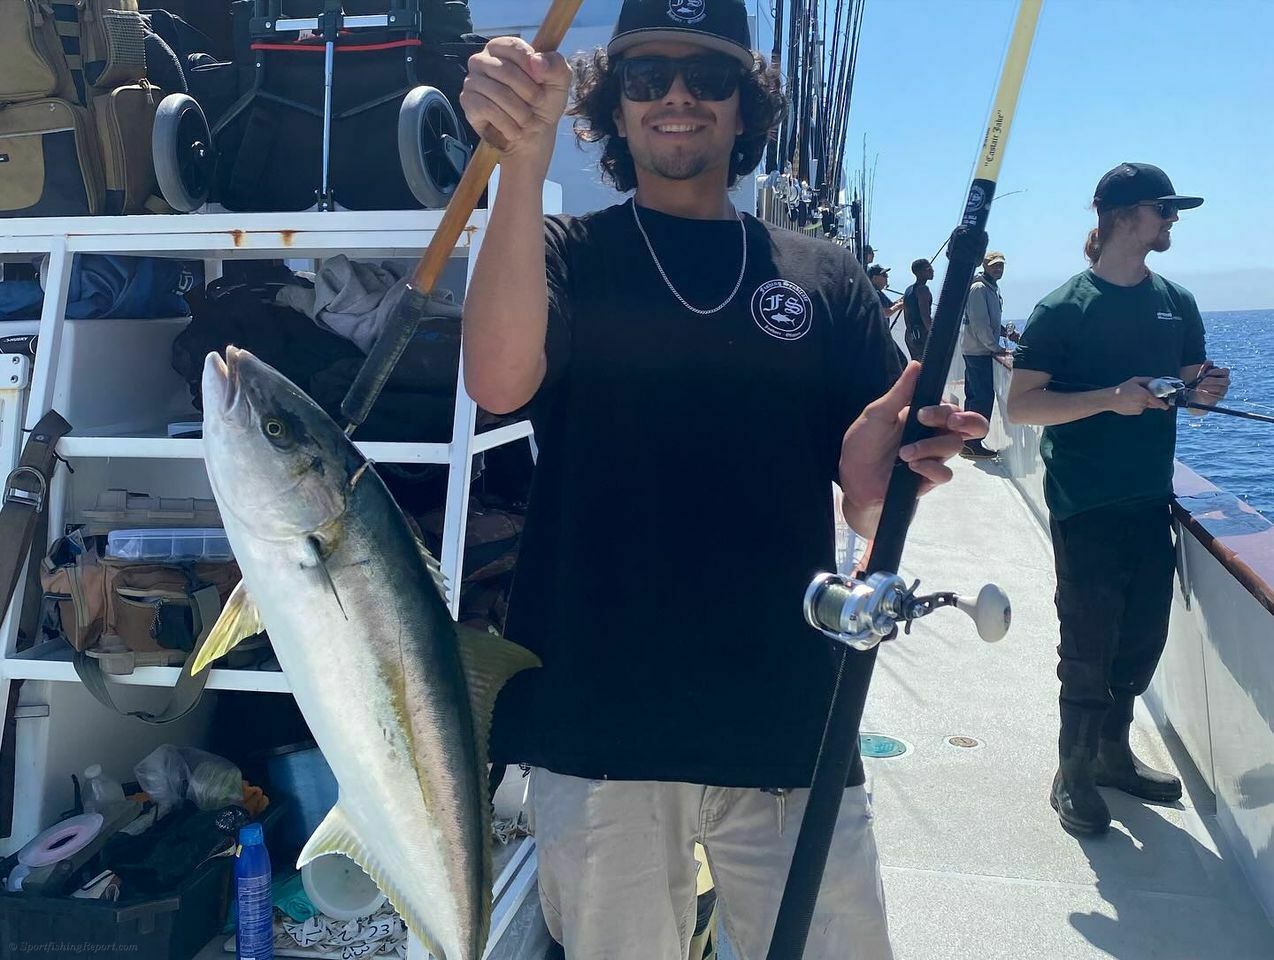 Yellowtail up to 30 lbs. 